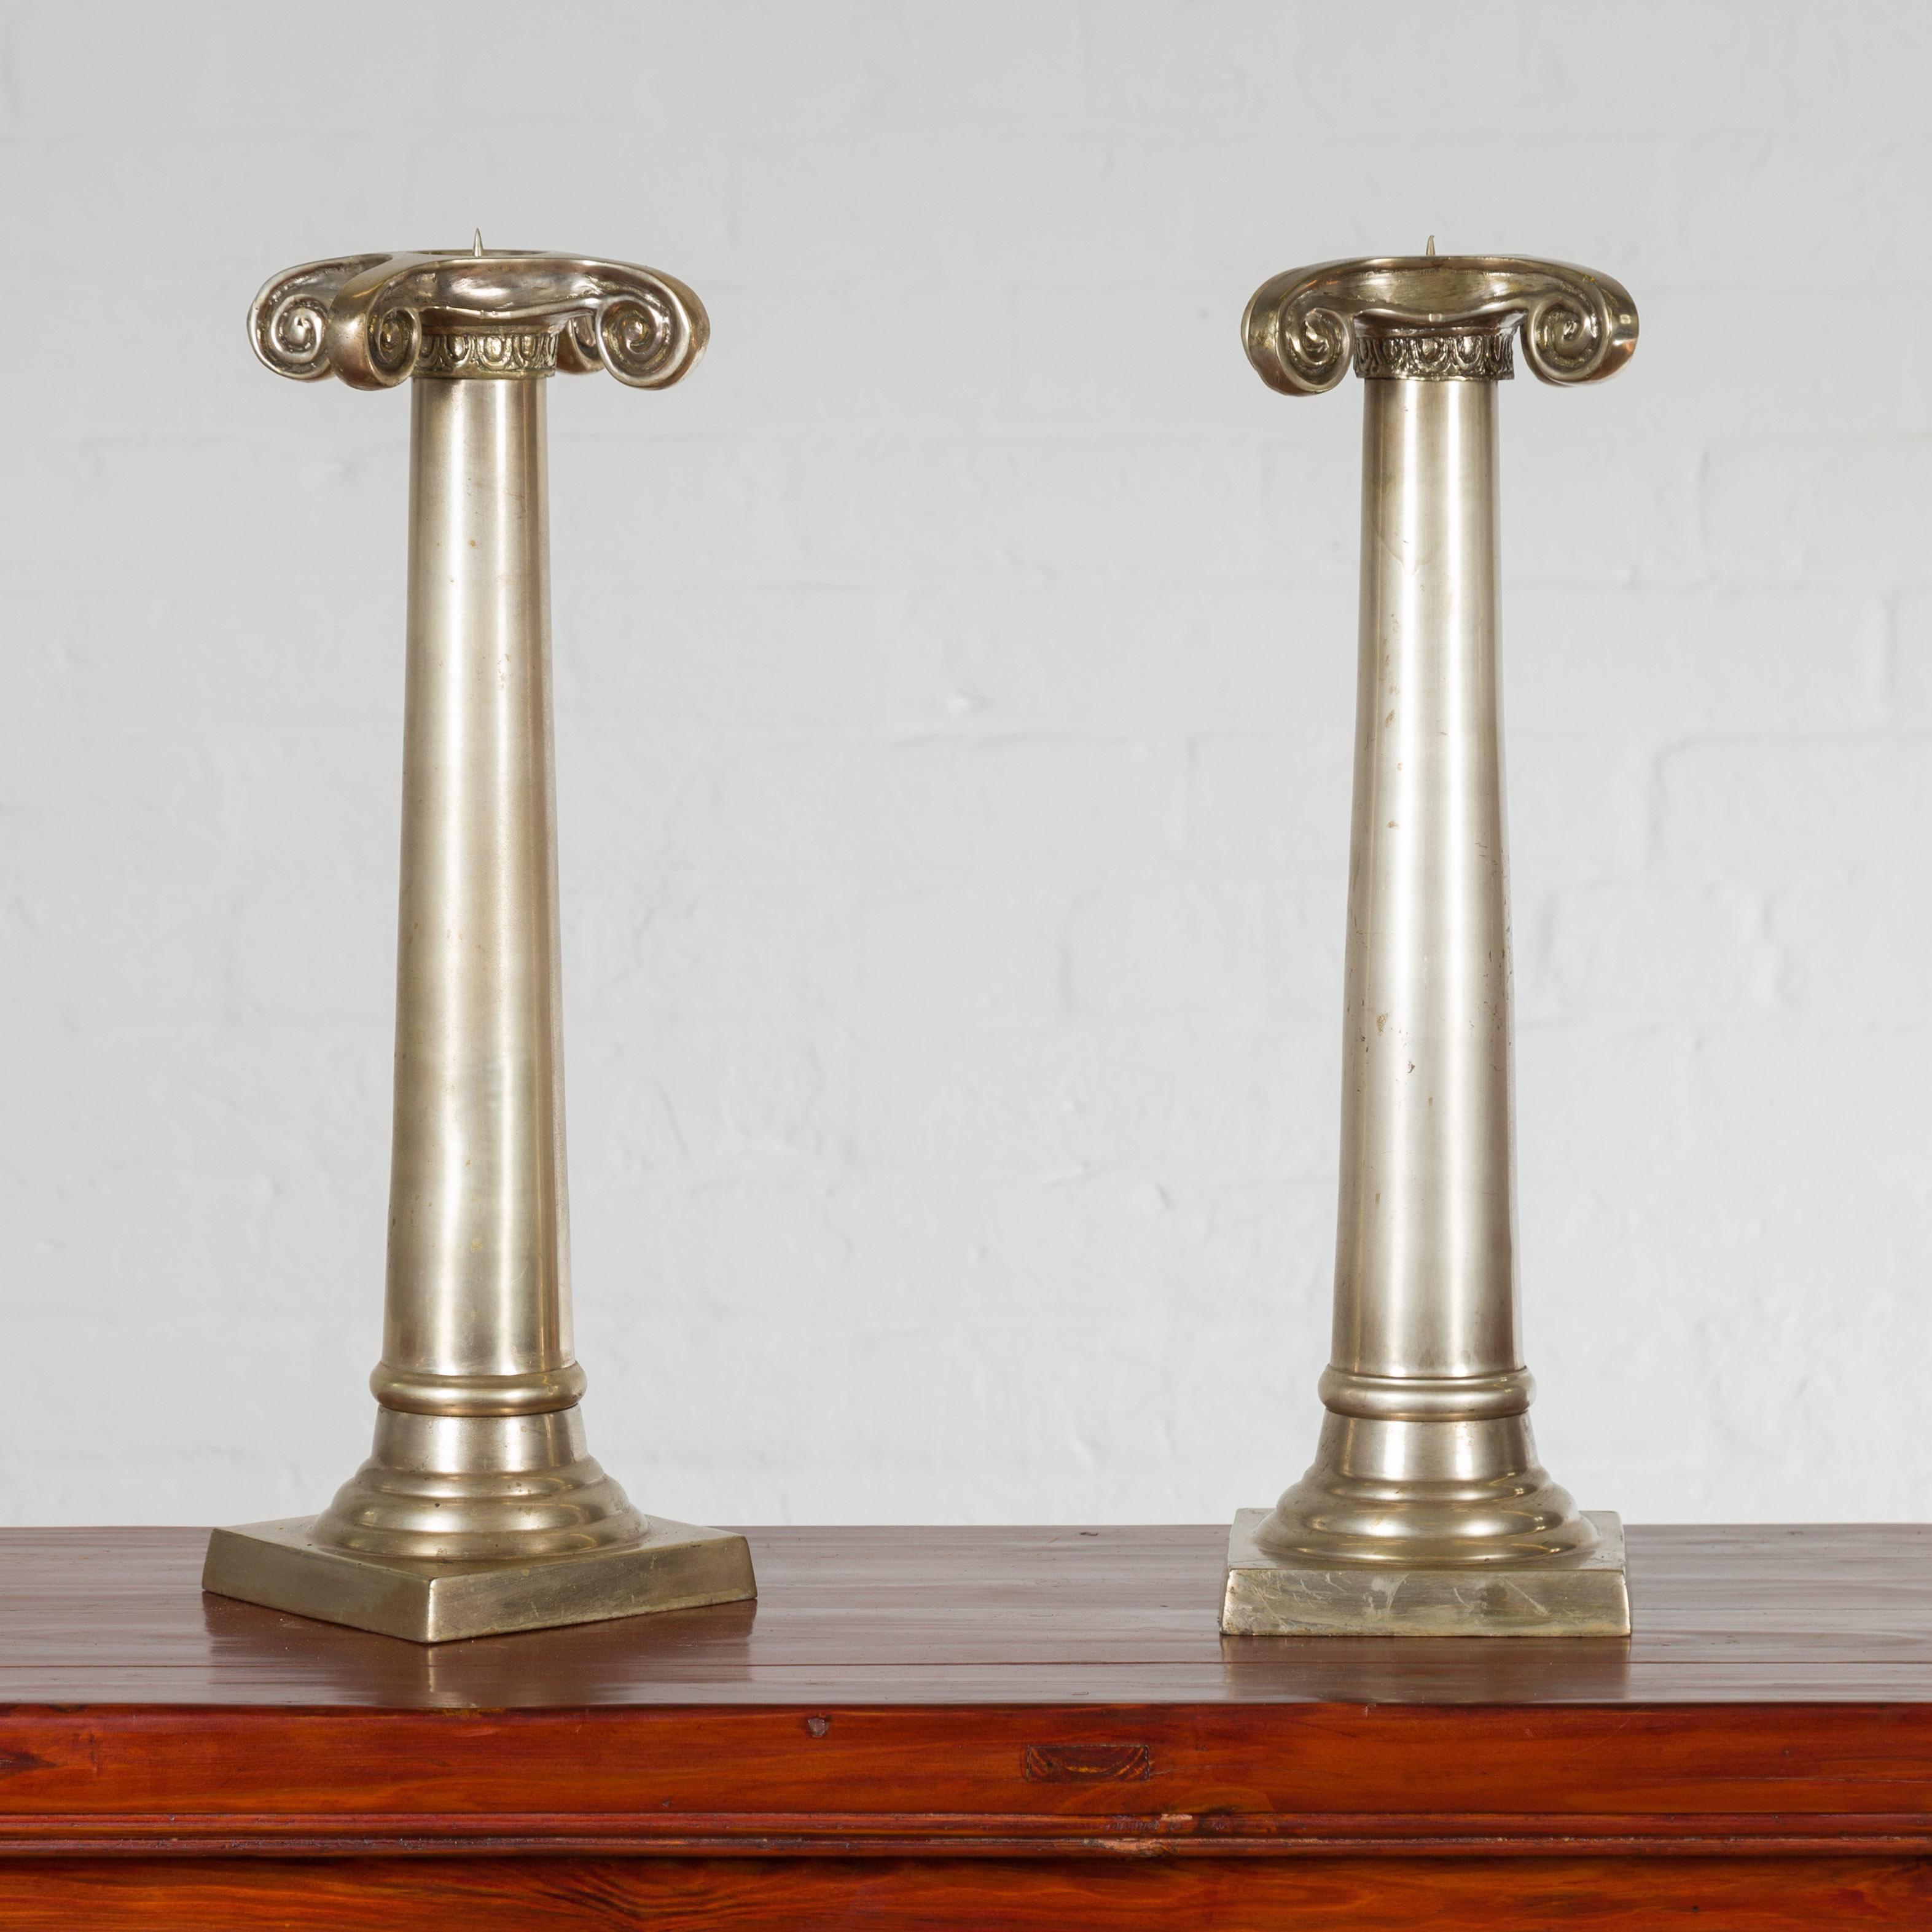 A pair of Thai brushed silver over bronze candlesticks from the mid 20th century, with Ionic capitals. Created during the midcentury period, each of this pair of Thai candlesticks features a sleek column topped with a large Ionic capital. Resting on